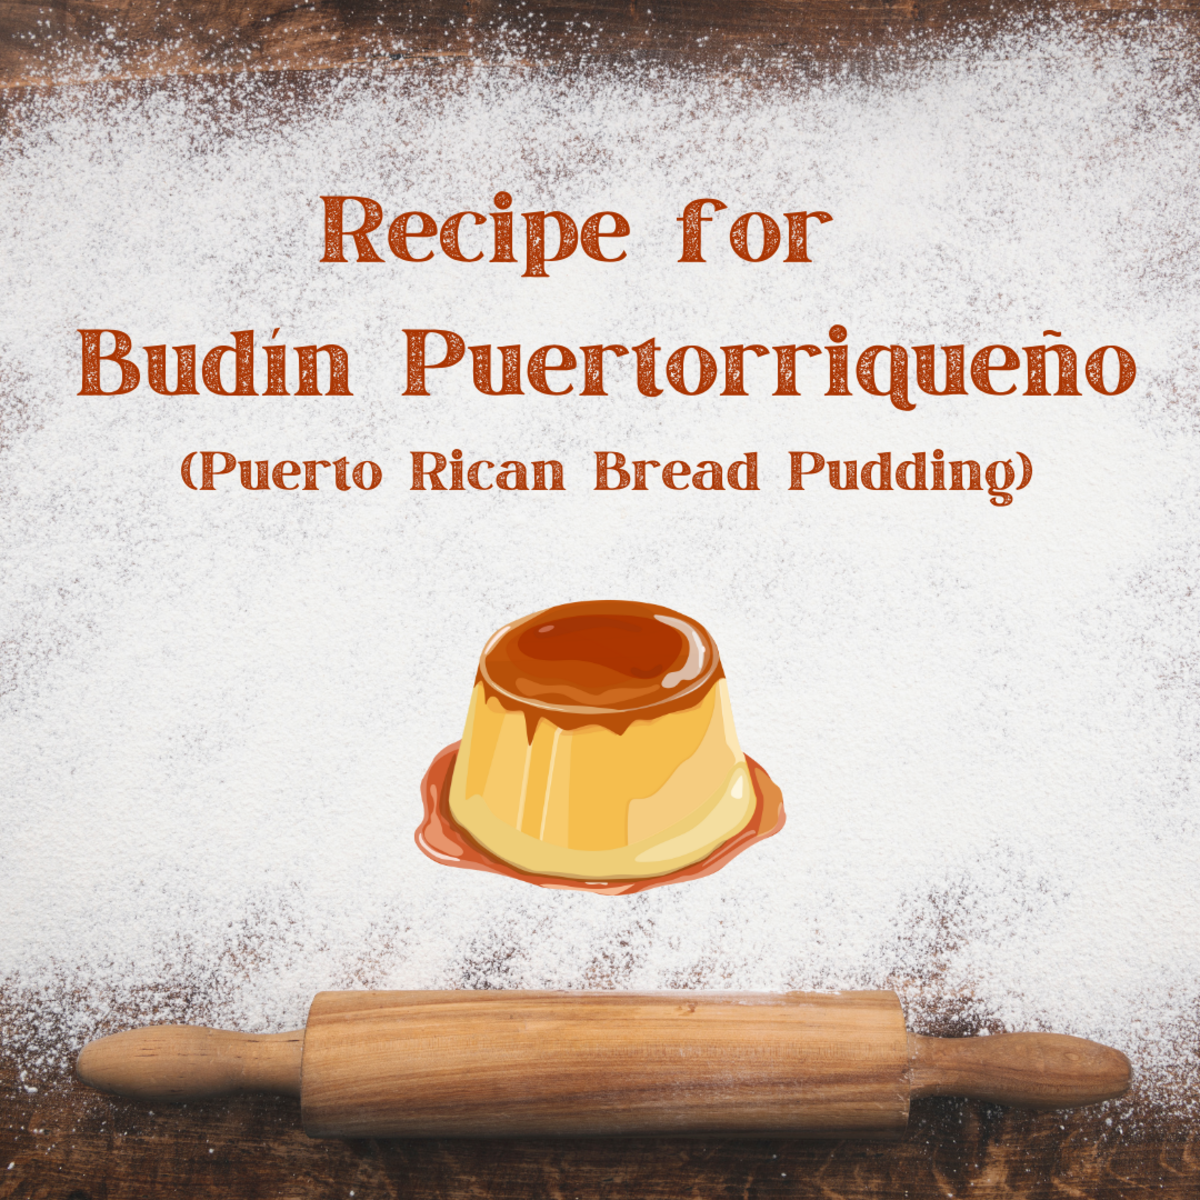 Enjoy this recipe for Puerto Rican bread pudding. 